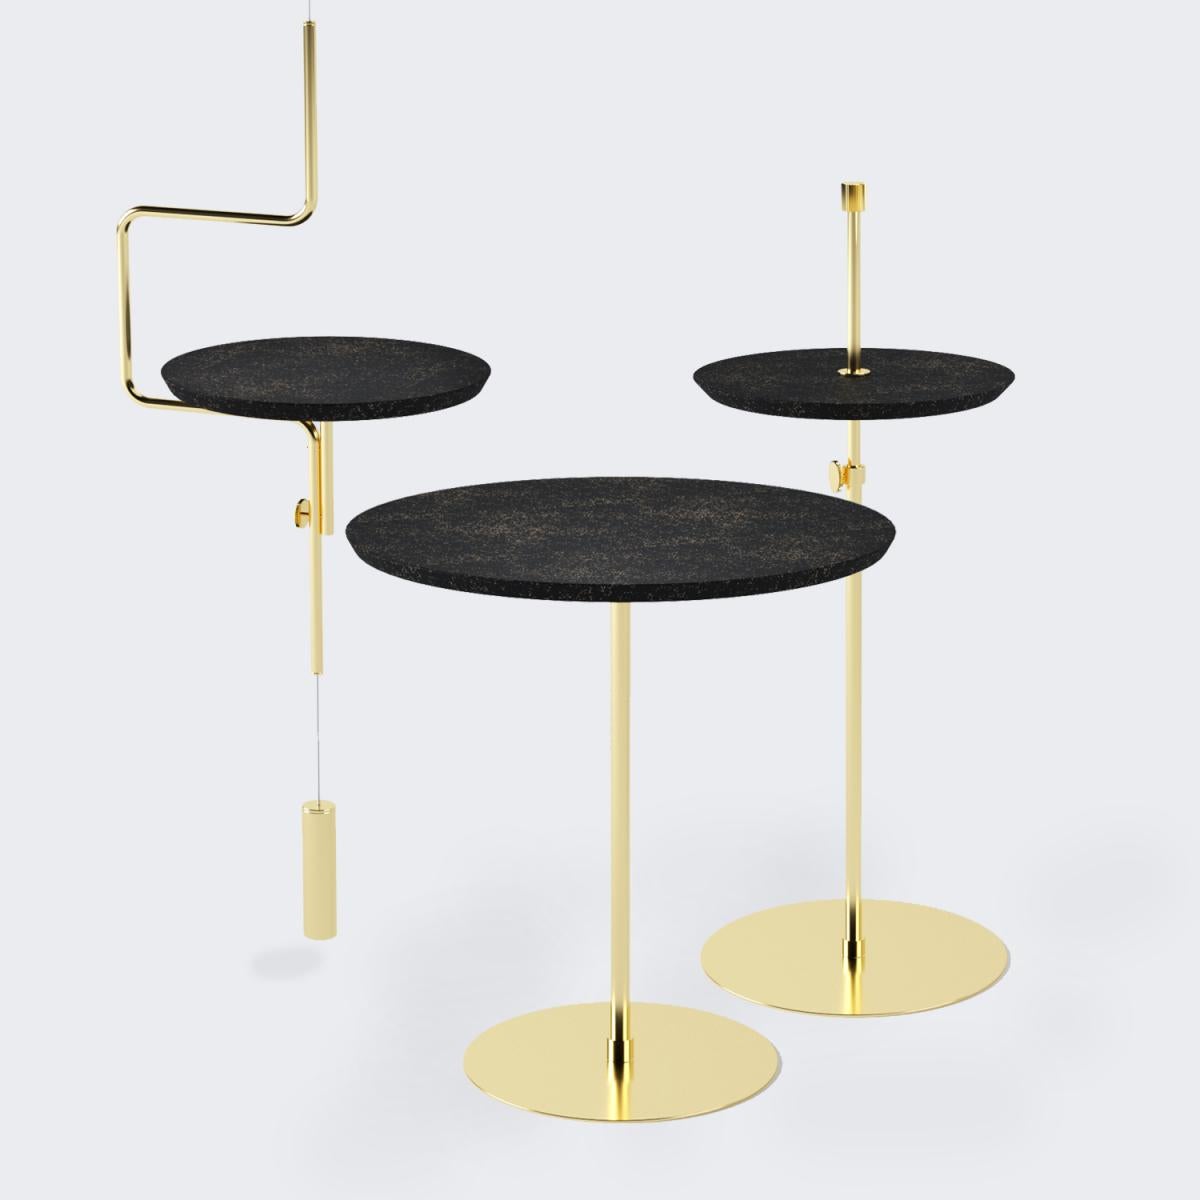 Brazilian Disco Hanging Table Brass and Rubberized Black Cork by decarvalho atelier For Sale